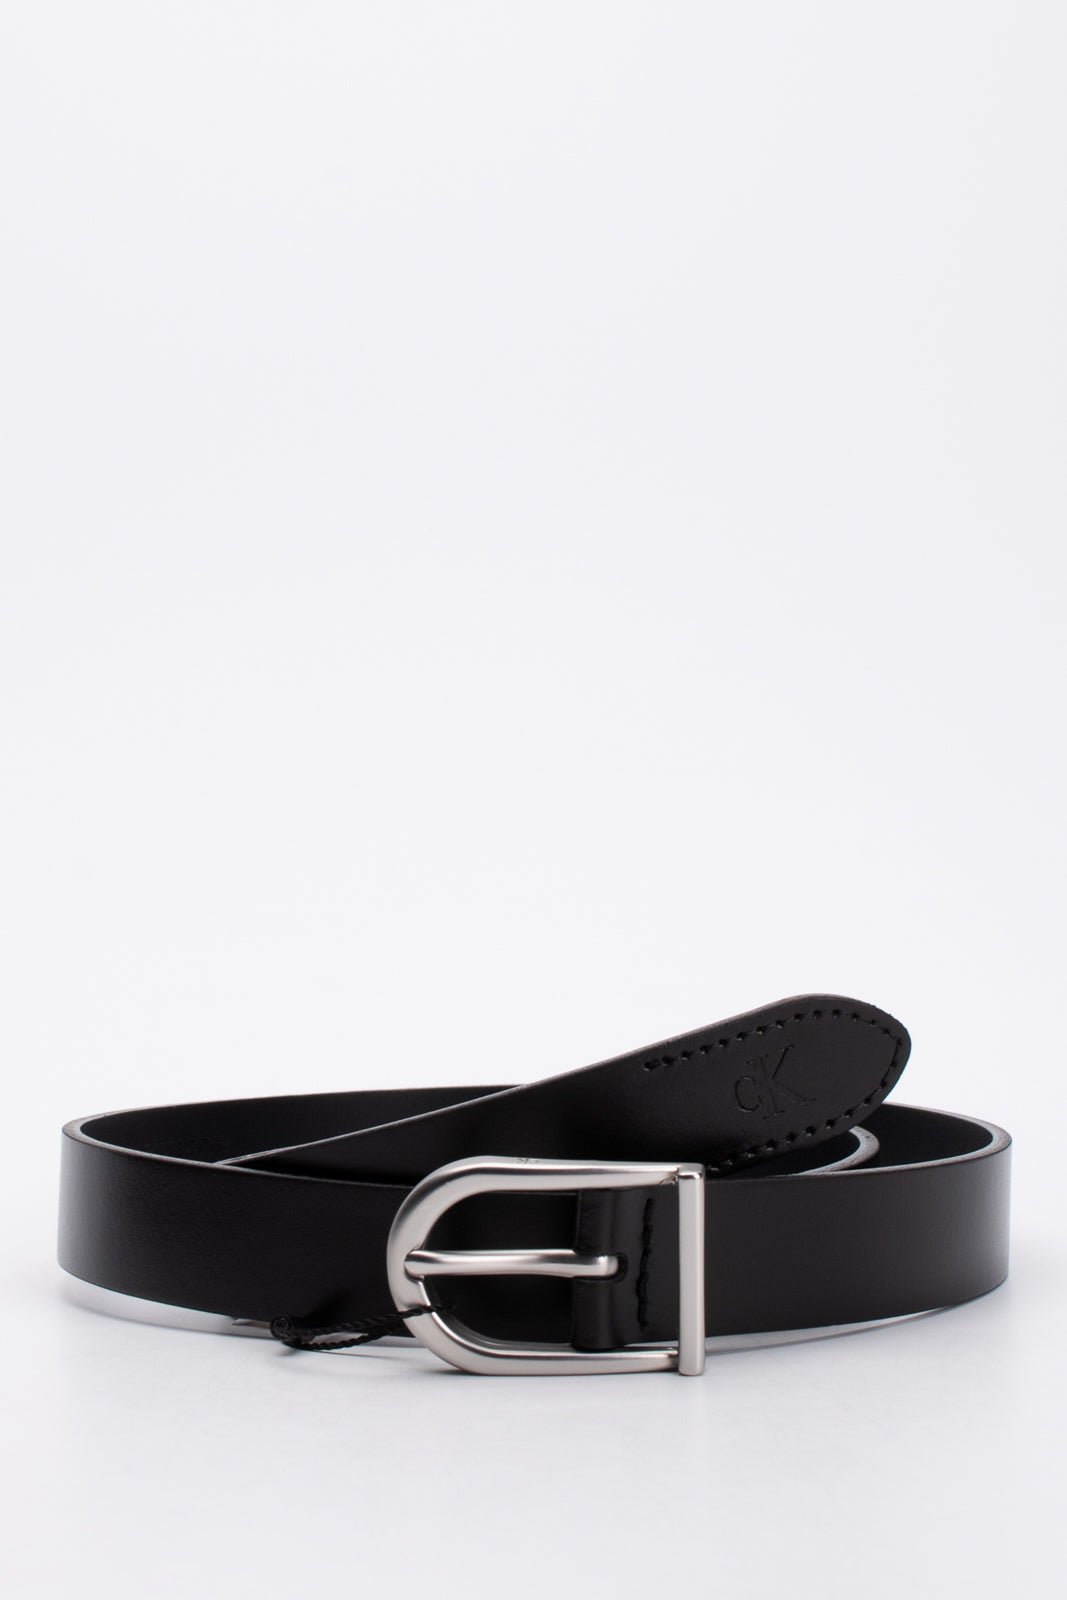 CALVIN KLEIN Smooth Leather Belt Size 100/40 Black Skinny Pin Buckle Closure gallery main photo